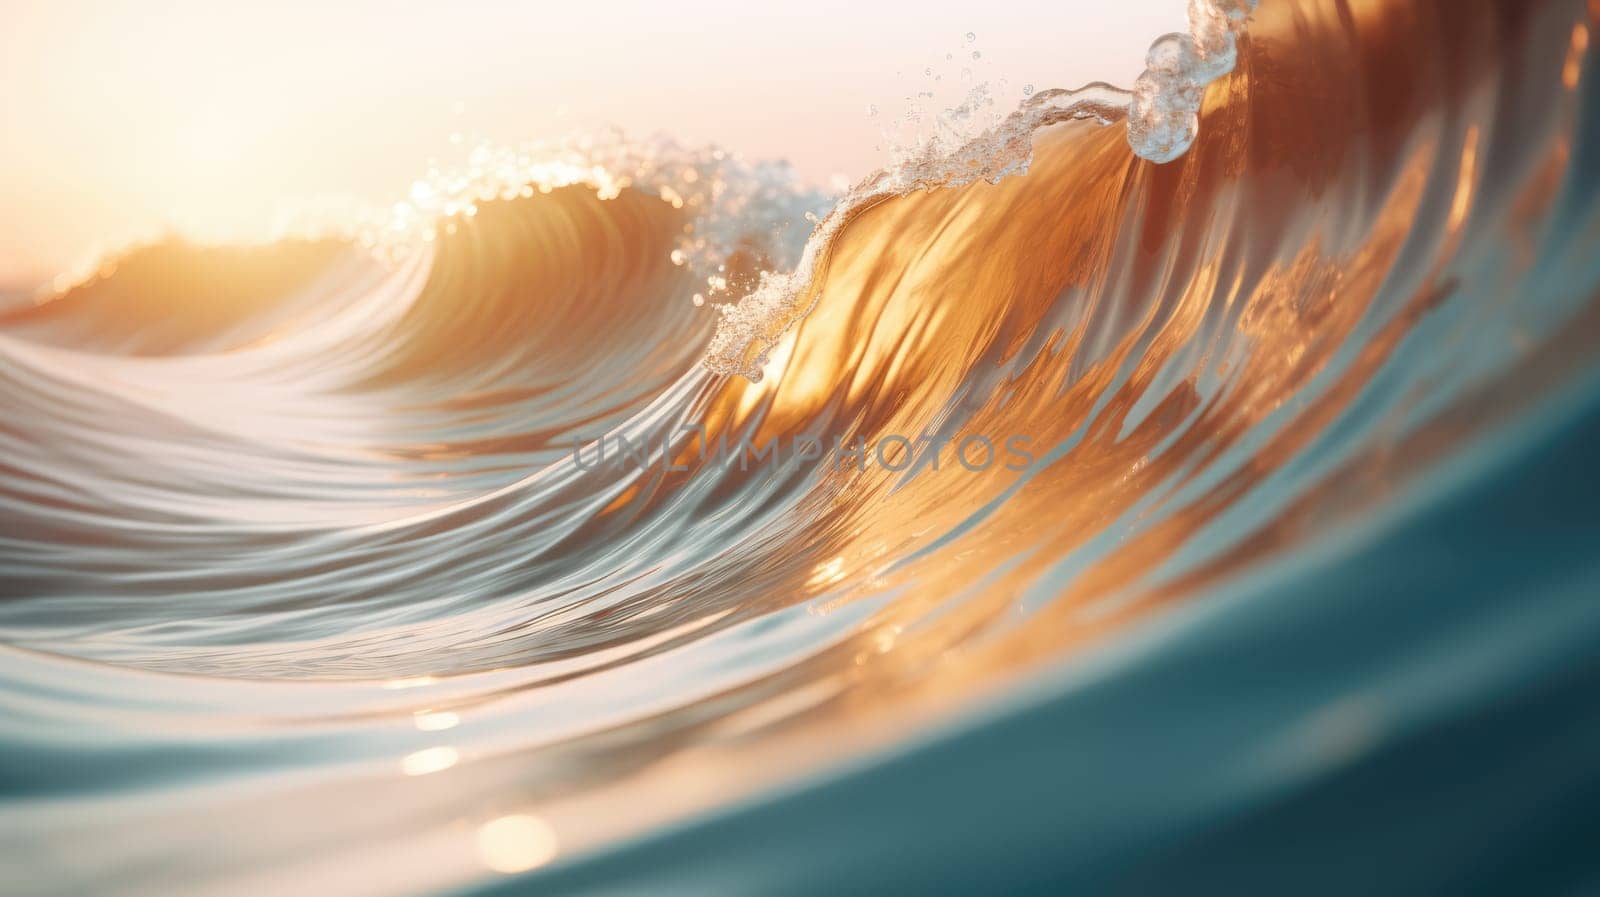 Ocean wave during sunset. Huge wave breaking with a lot of spray and splash. Sea water background